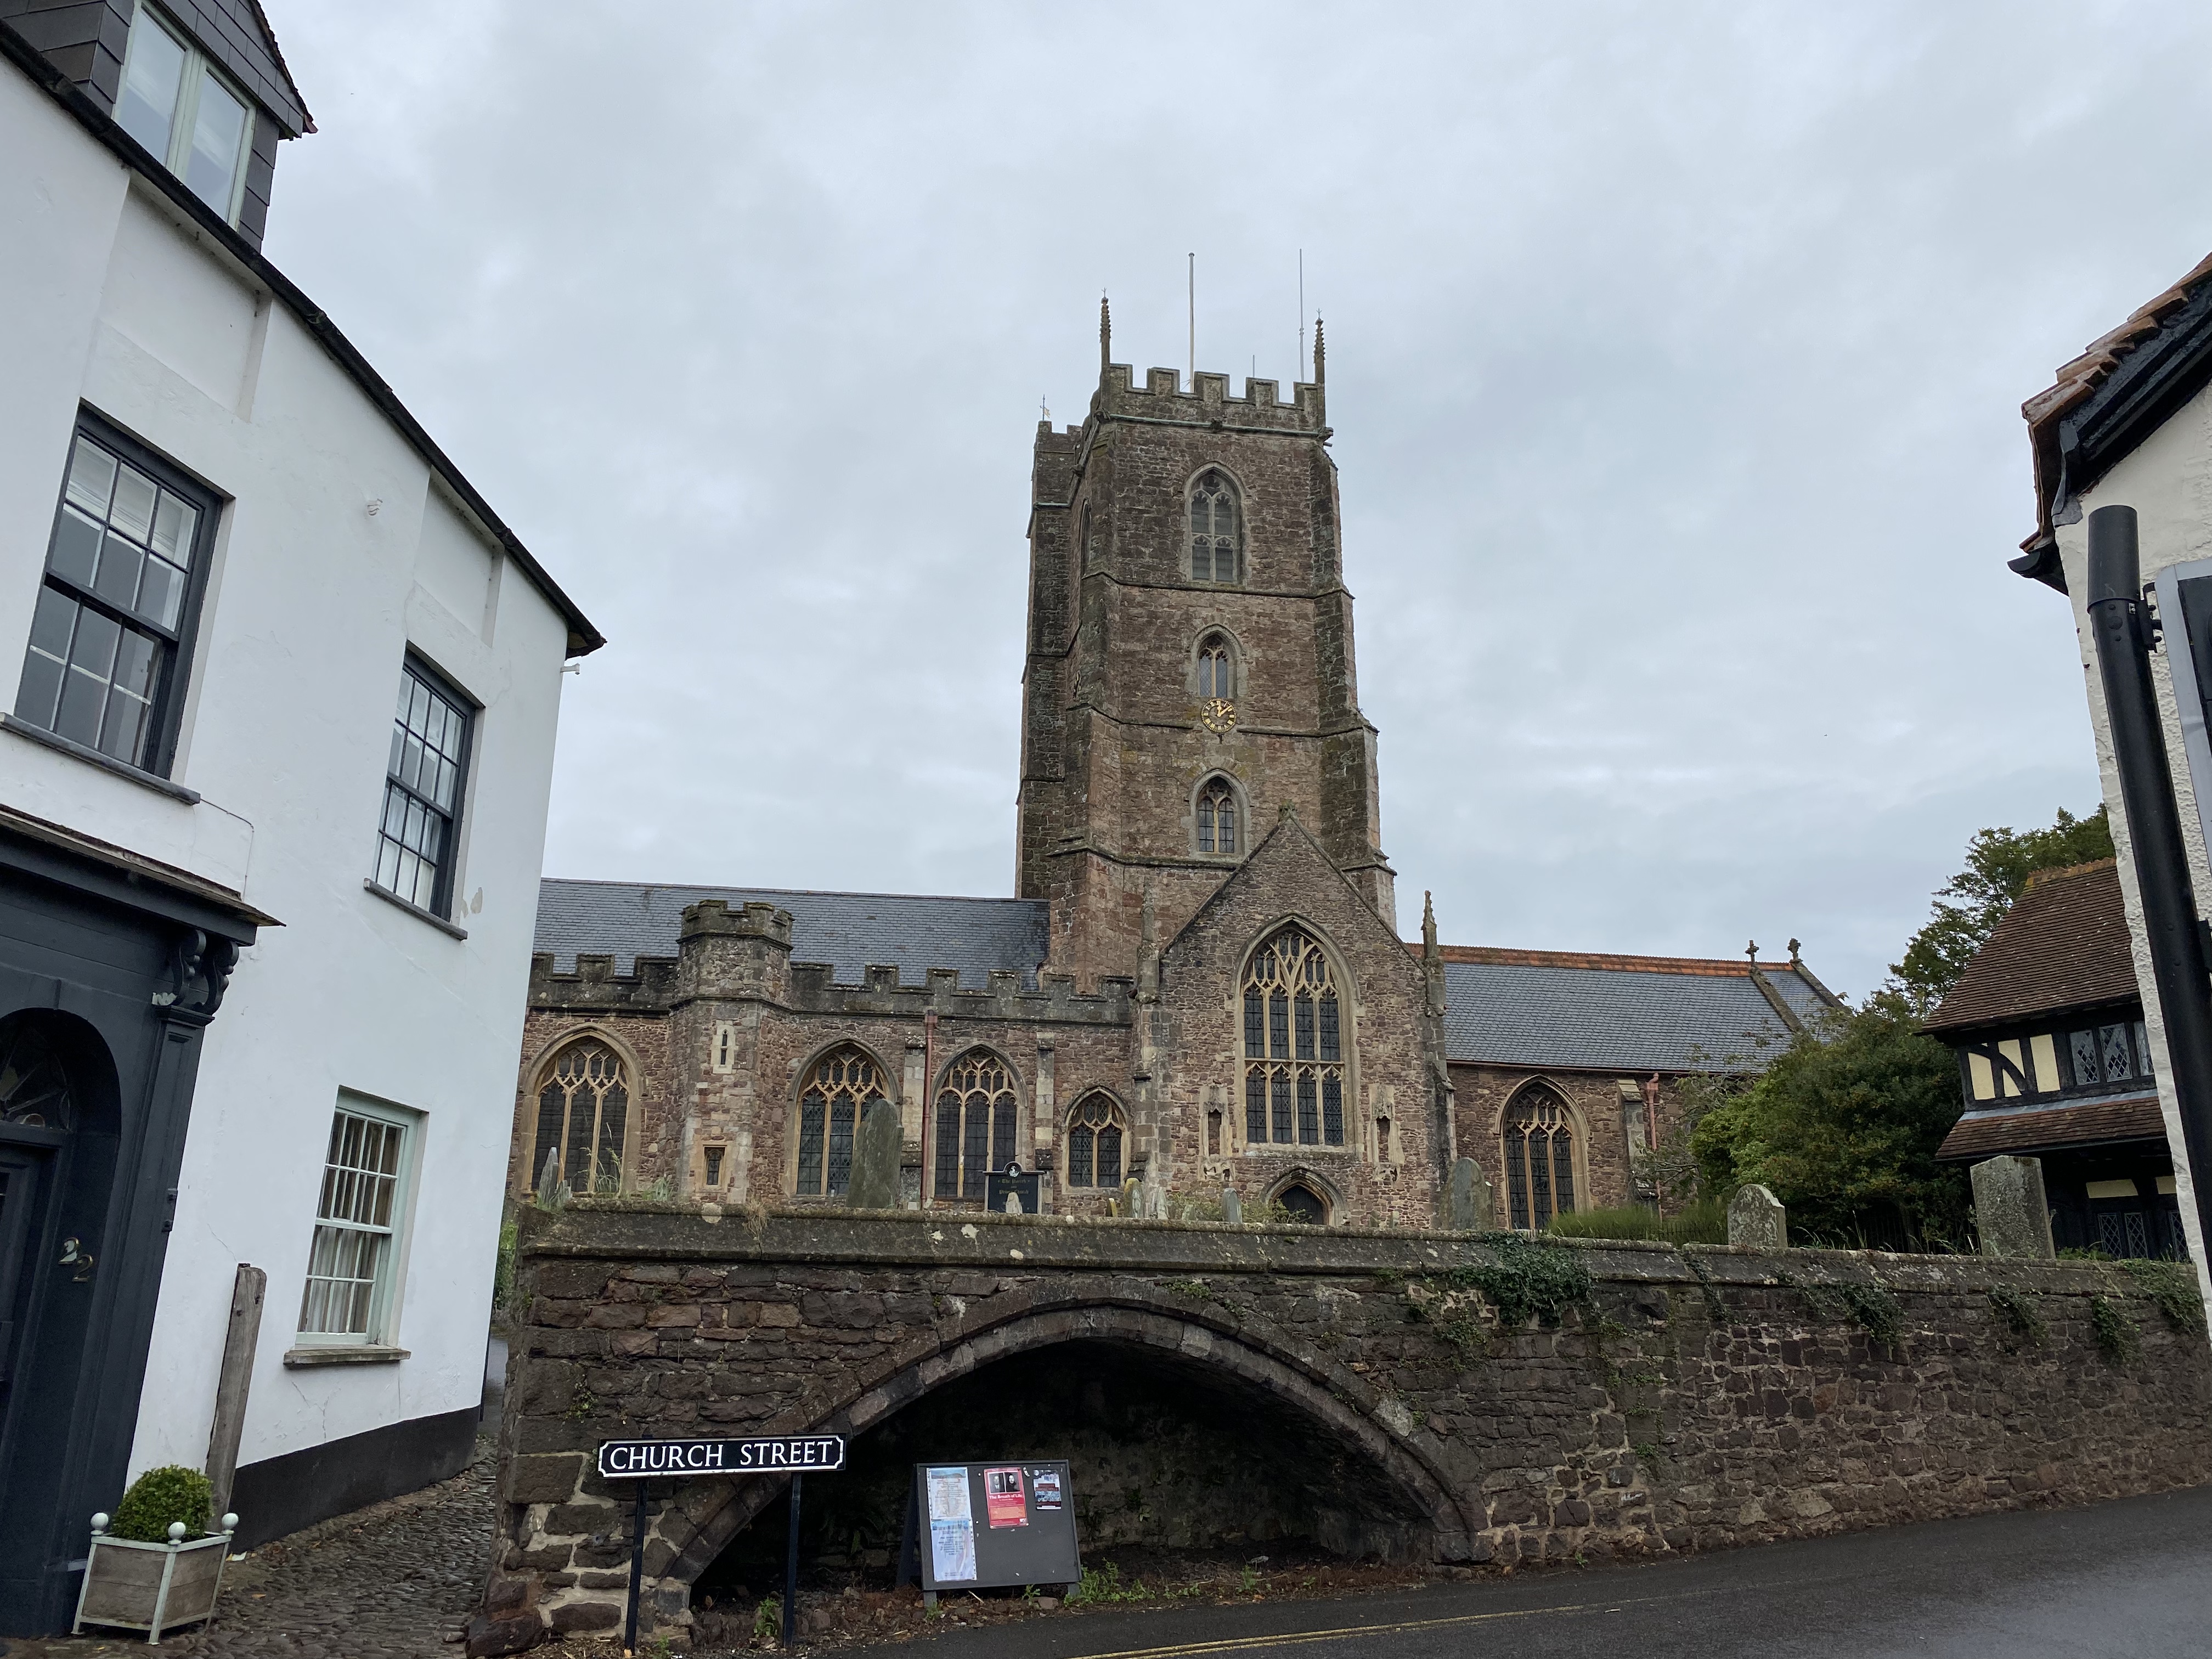 The lives of Somerset churches – the Priory Church of St George, Dunster